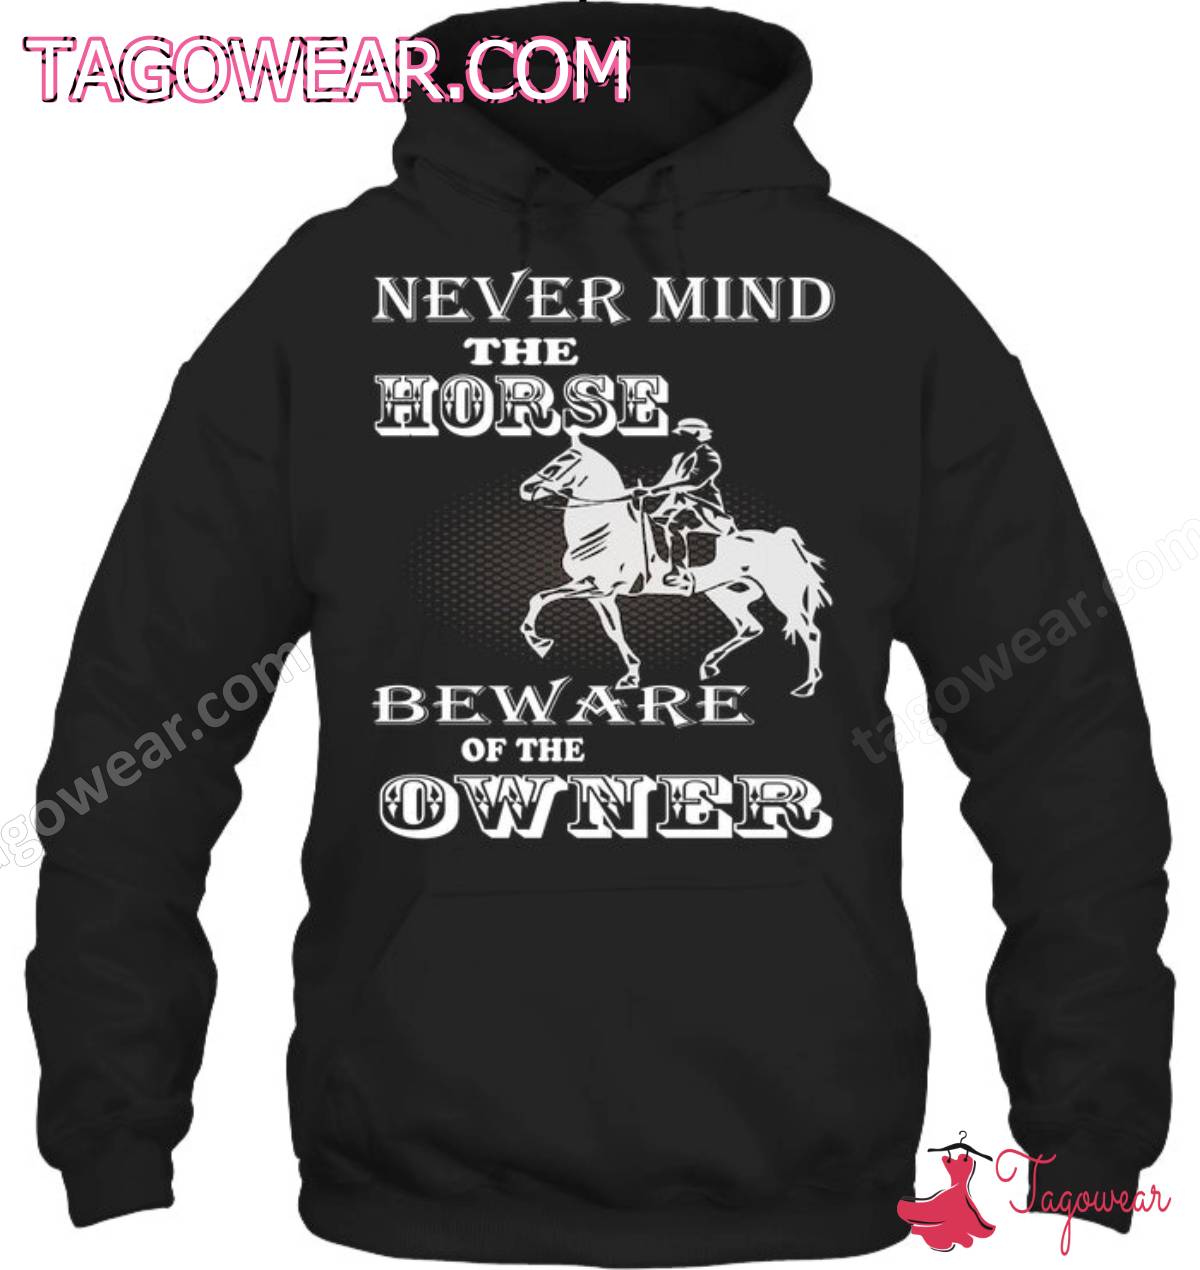 Never Mind The Horse Beware Of The Owner Shirt a